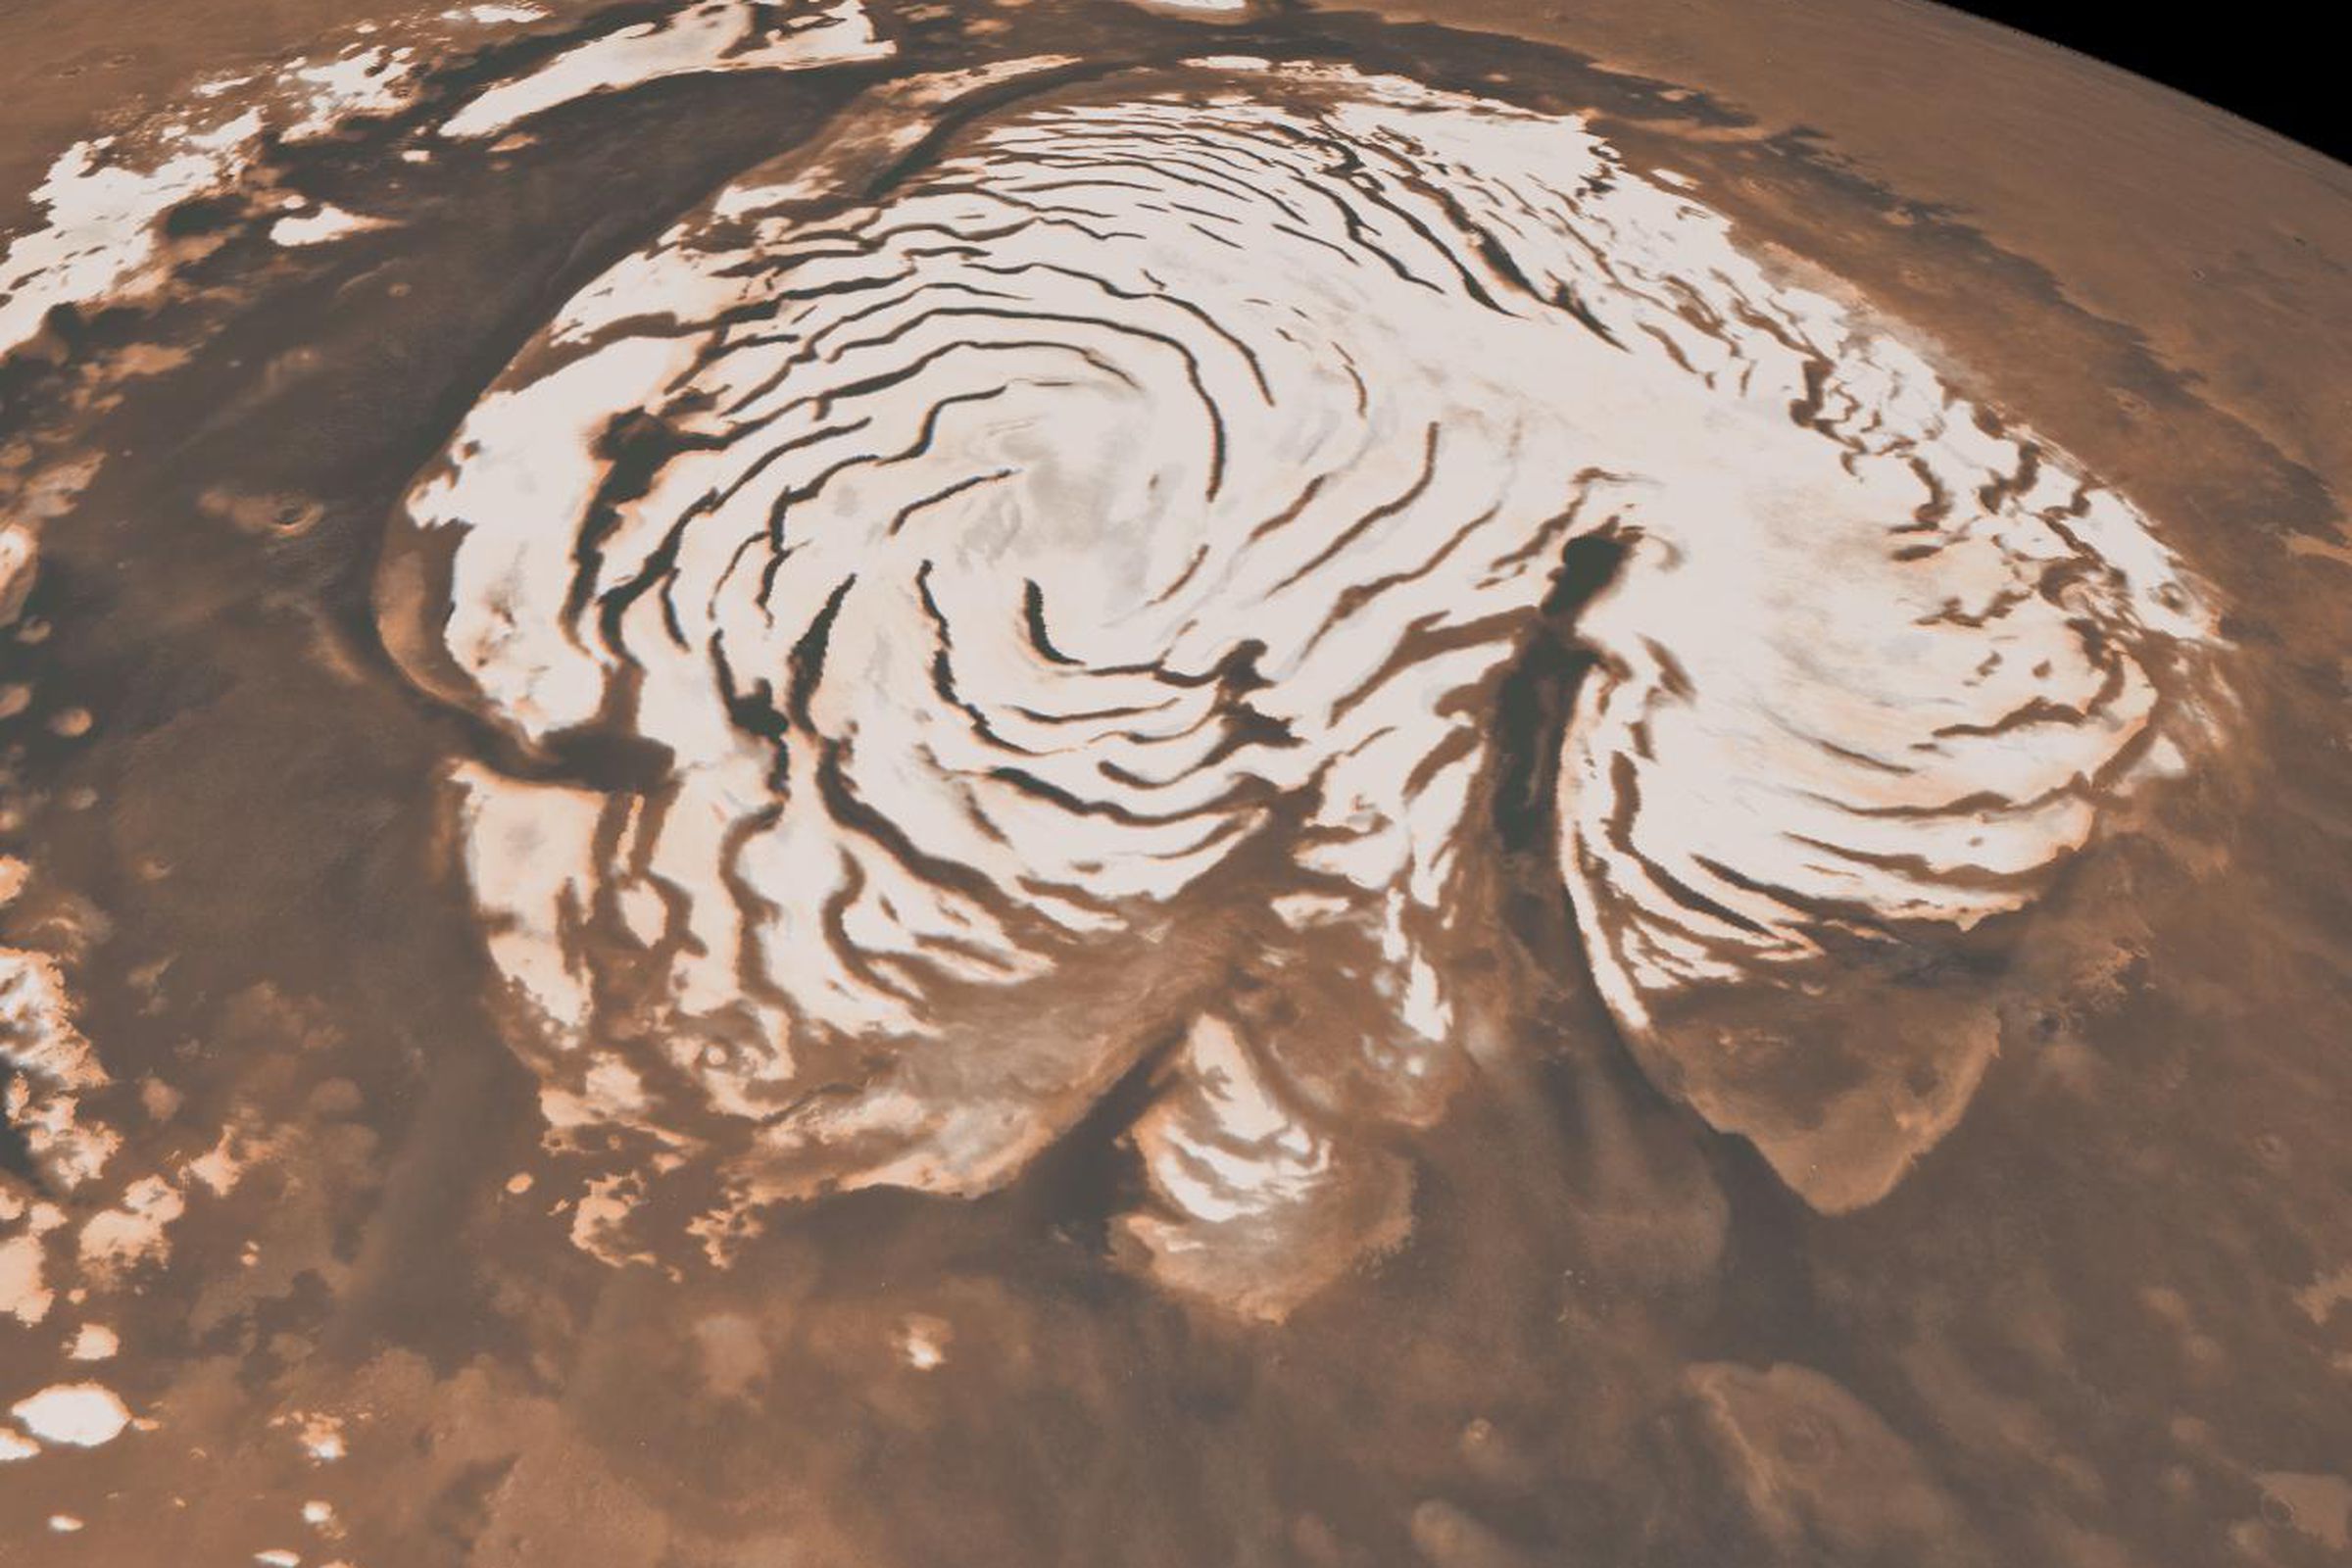 Mars’ northern pole, which consists of water and carbon dioxide snow.